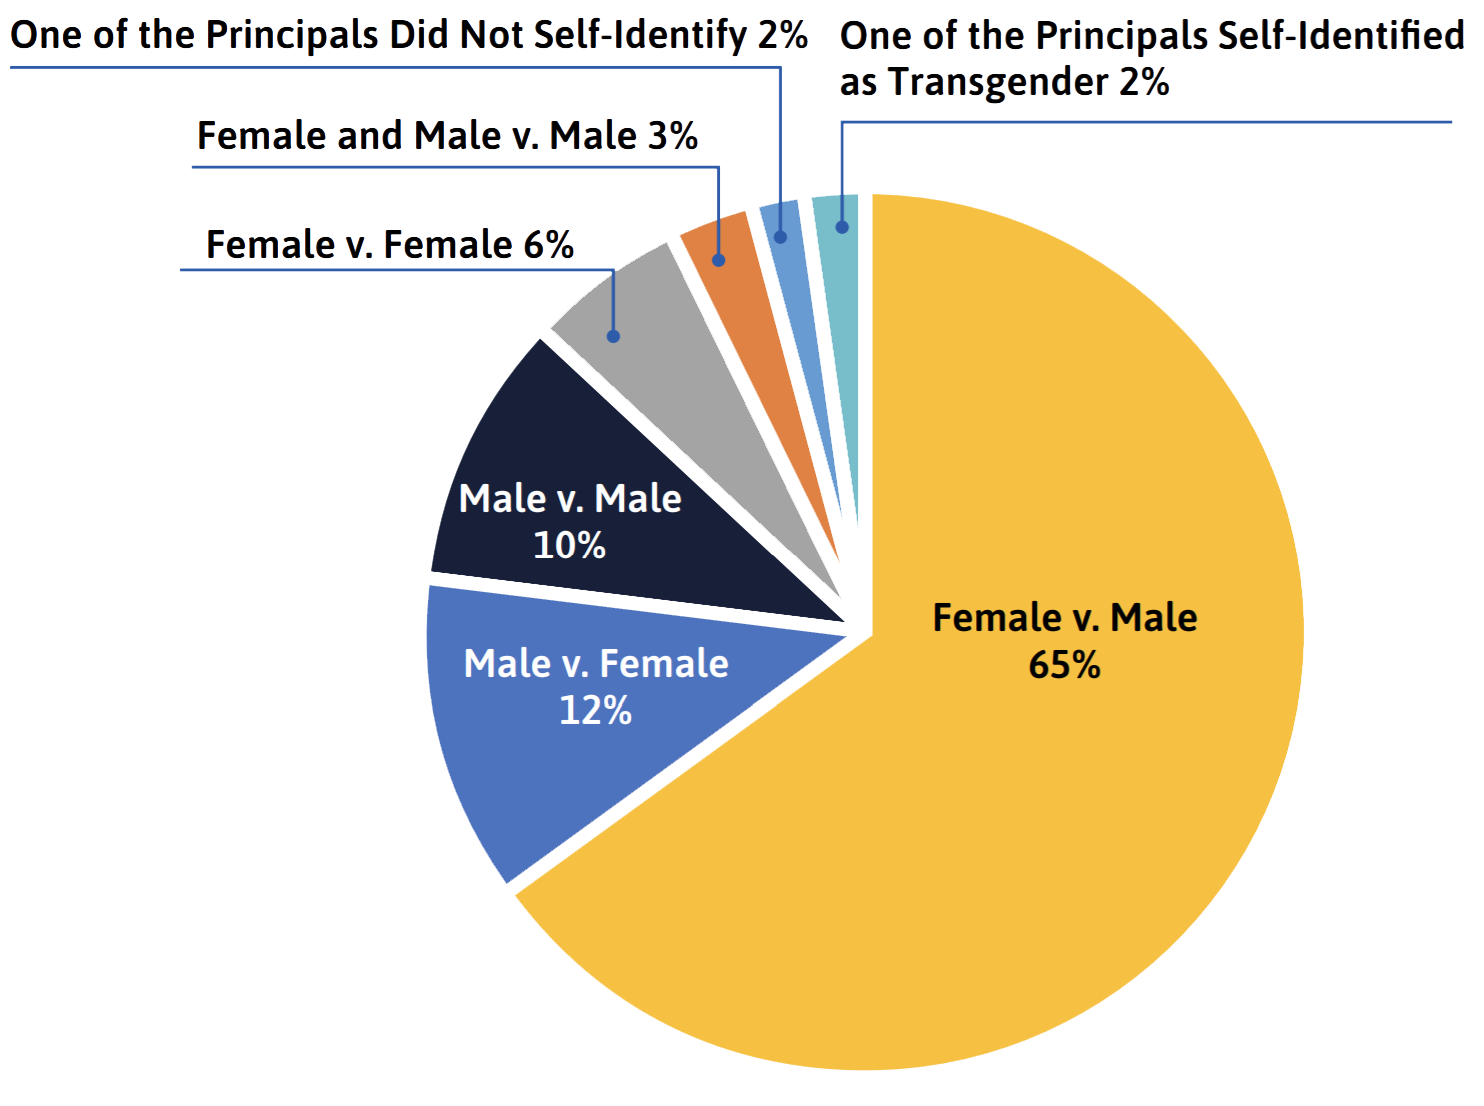 A pie chart showing the self-identified gender of principals in ODR complaints, grouped by complainant v. respondent, FY15-FY20.